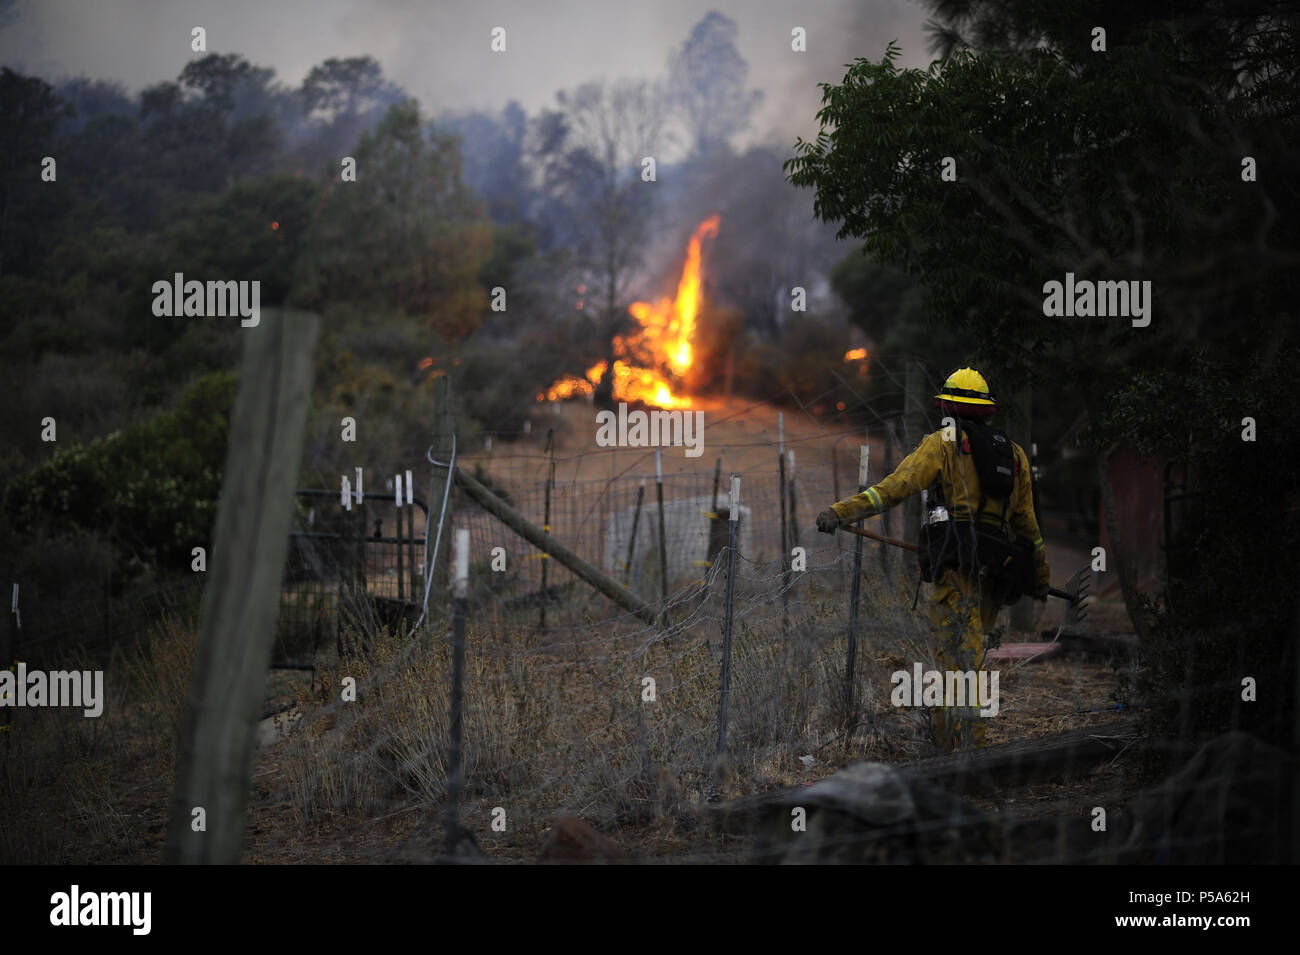 June 24, 2018 - Clearlake Oaks, California, USA - A Cal Fire strike team from the Wilbur Springs station in Williams CA spent Sunday morning watching as the Pawnee Fire slowly made its way towards a home in the Spring Valley area of Lake County. (Credit Image: © Neal Waters via ZUMA Wire) Stock Photo